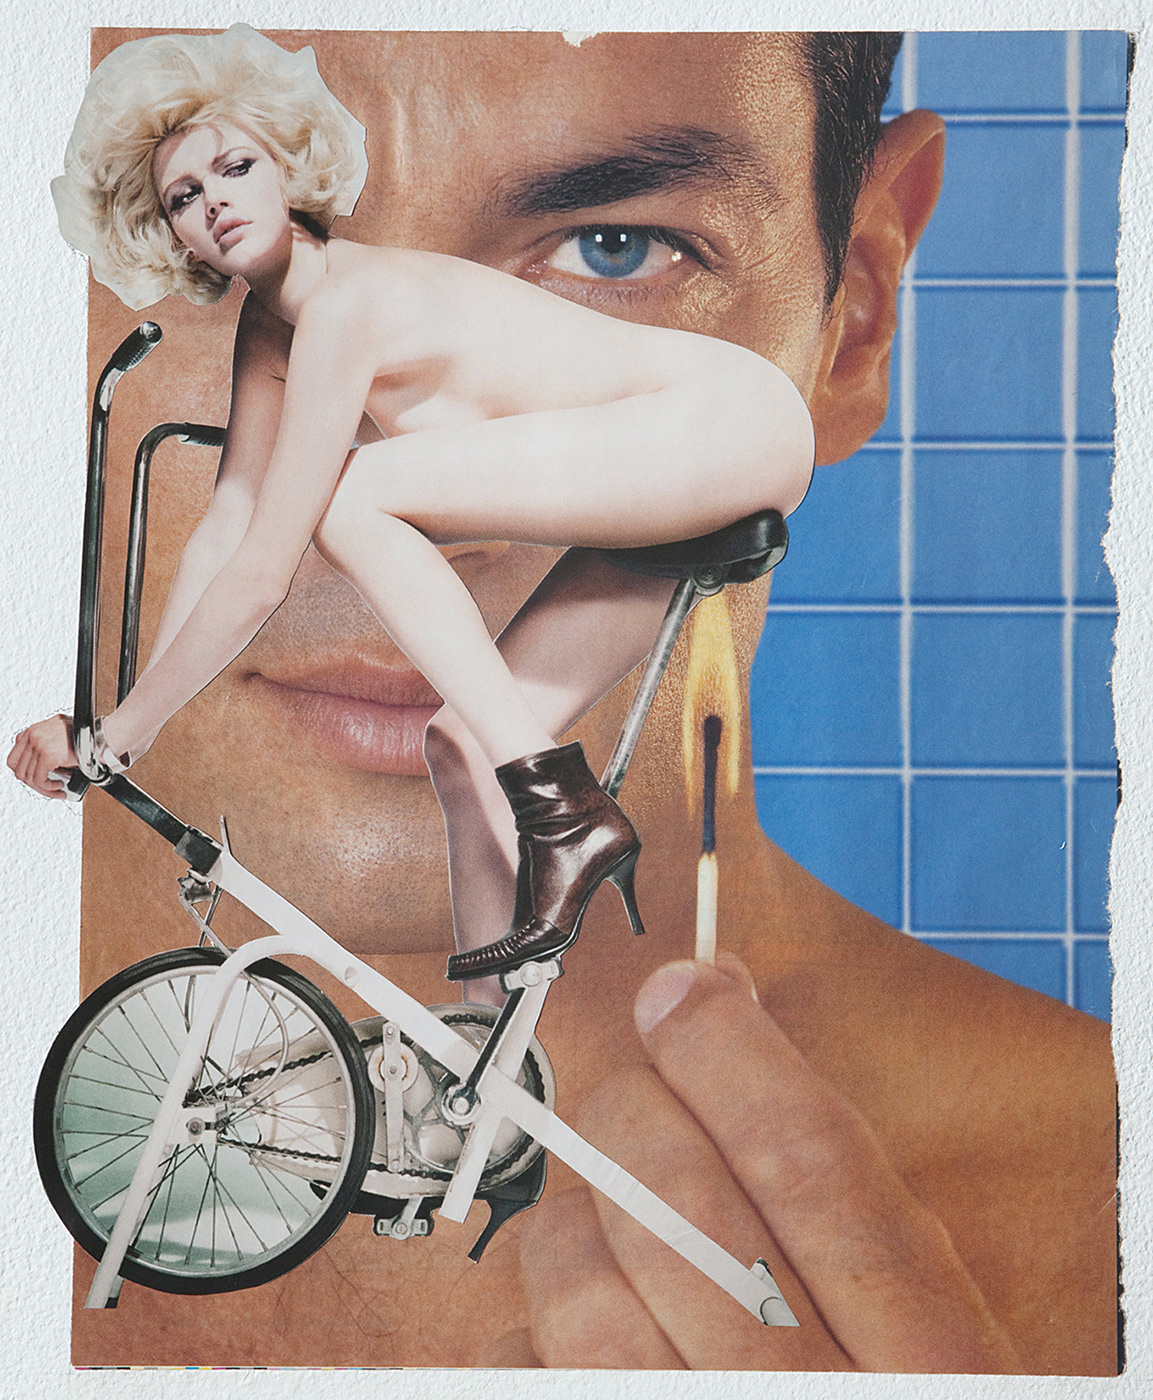 A Bicyclette, 2003